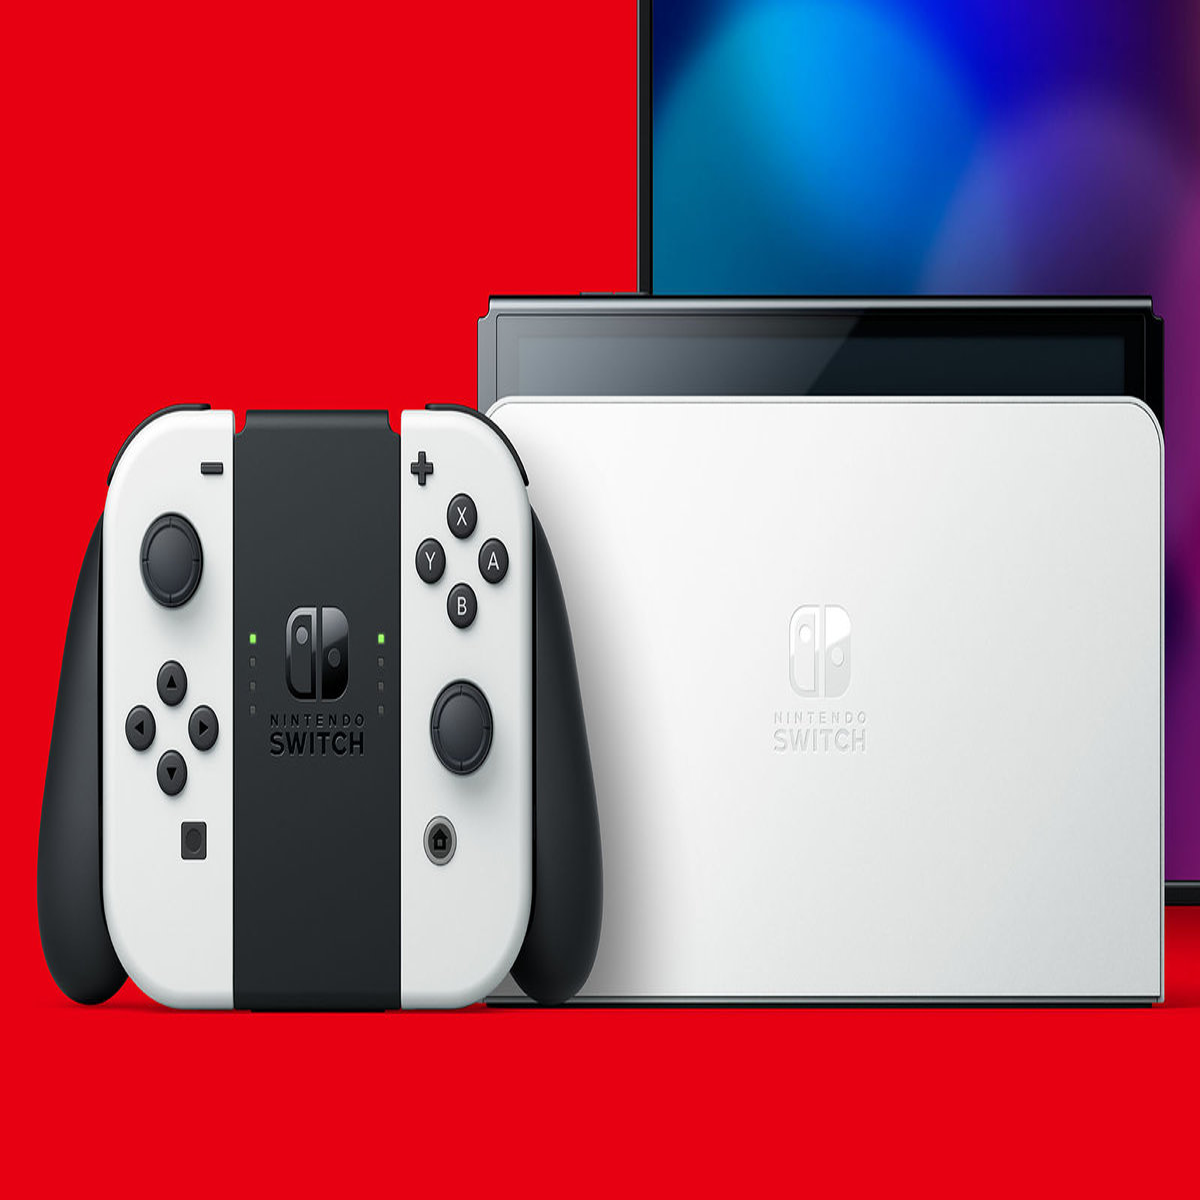 Currys has unleashed the best Nintendo Switch OLED deals we've seen yet